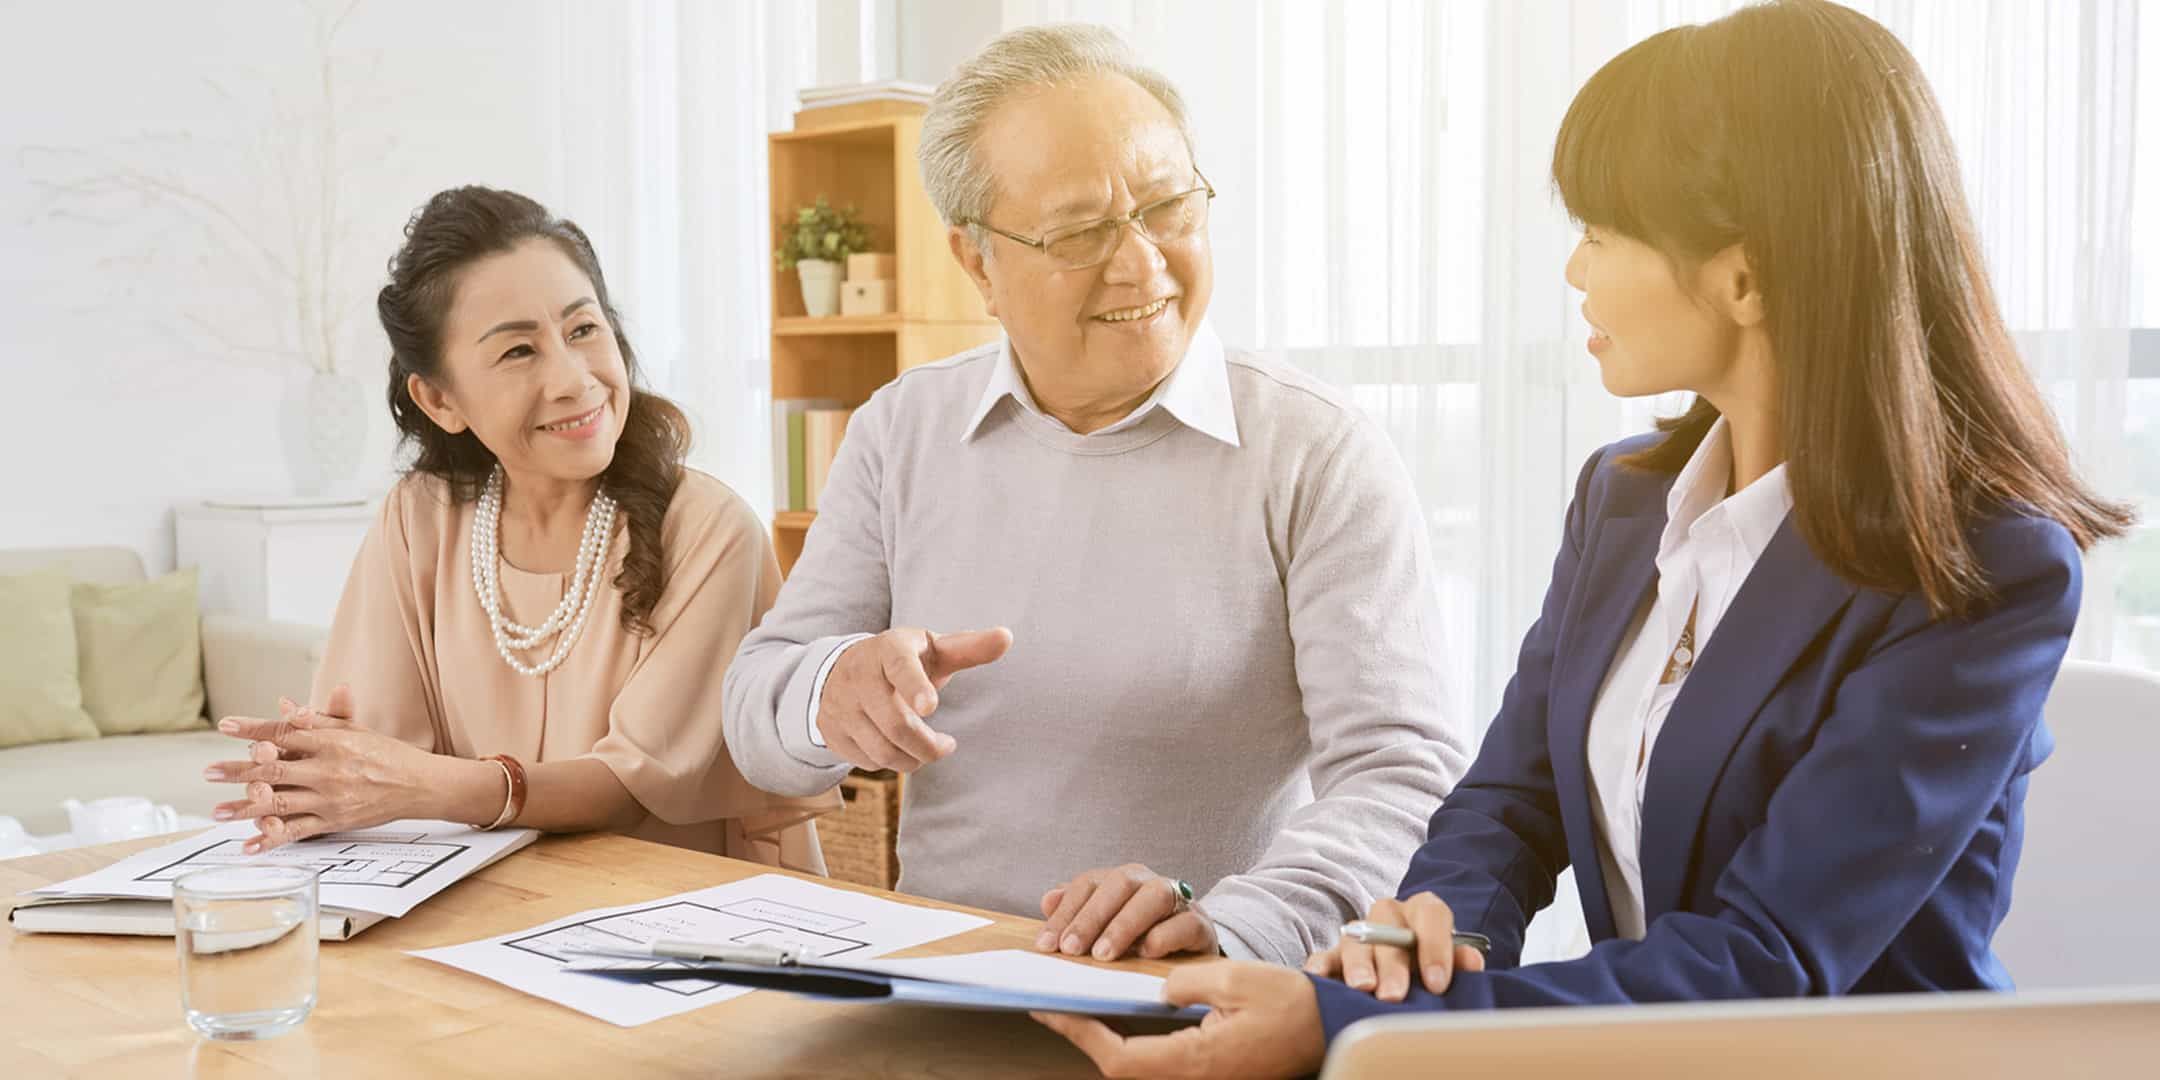 If You Need to Get Power of Attorney for a Parent, Here